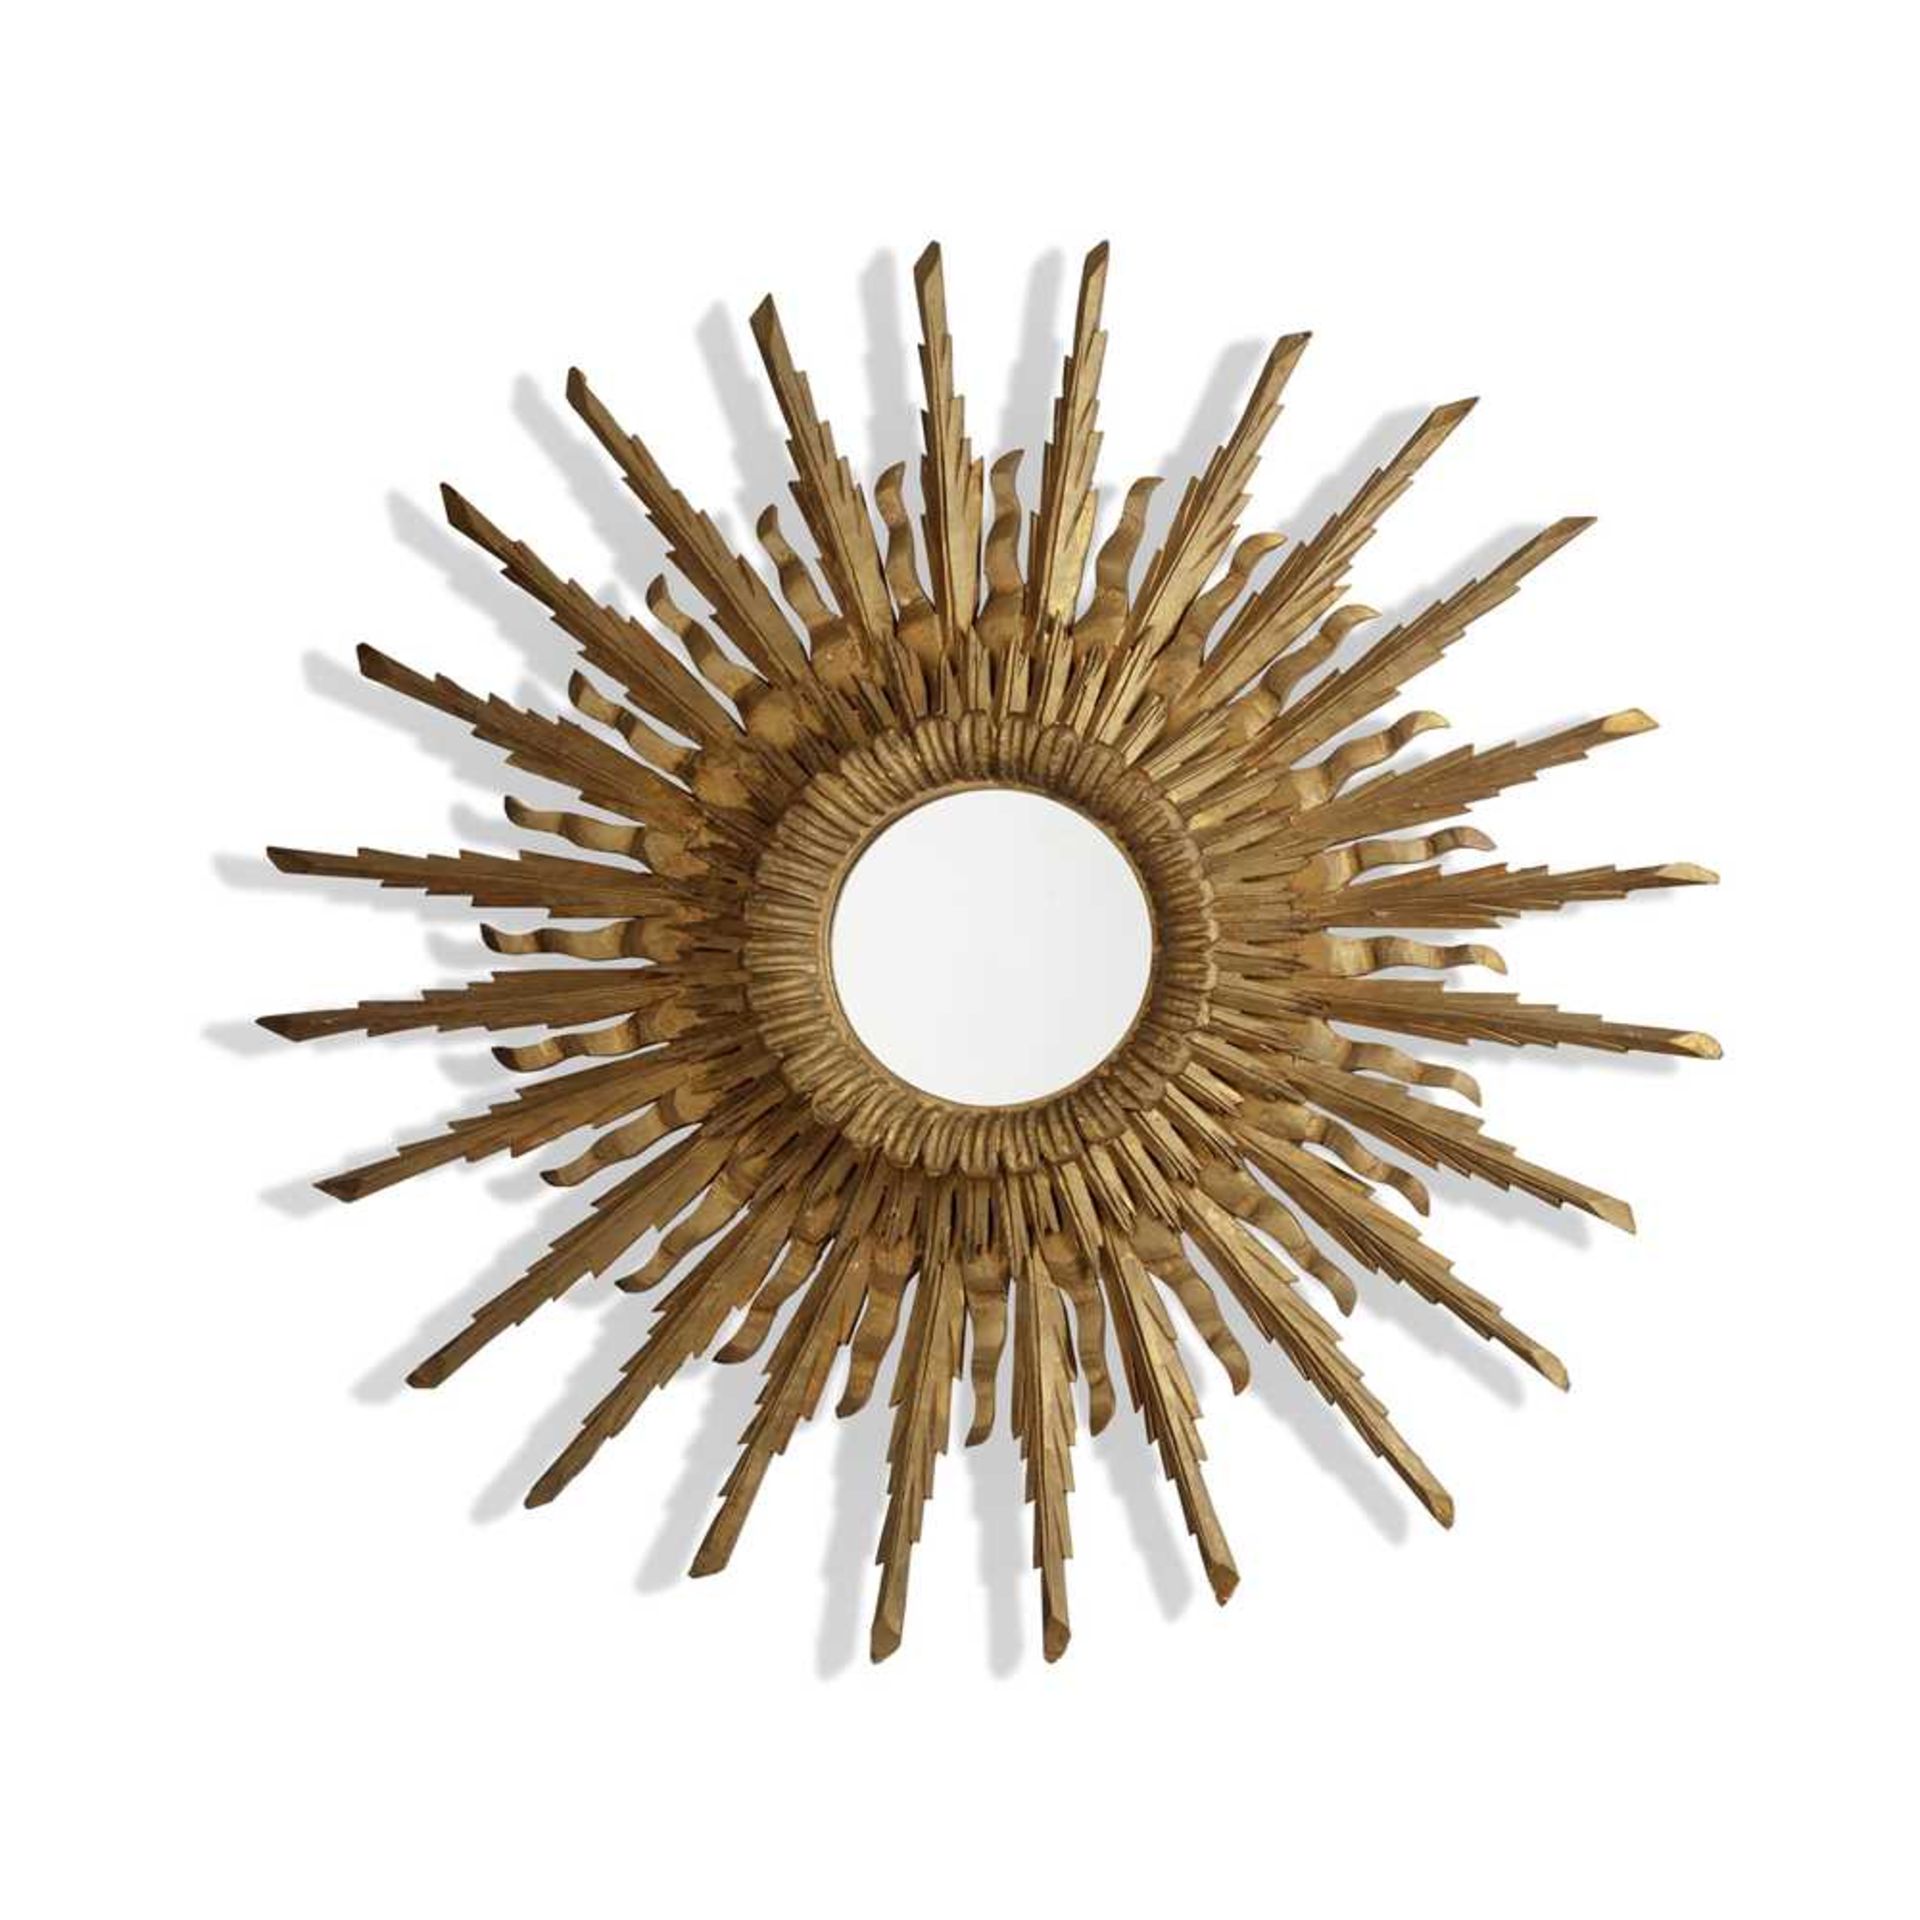 CONTINENTAL GILTWOOD SUNBURST MIRROR LATE 19TH/ EARLY 20TH CENTURY